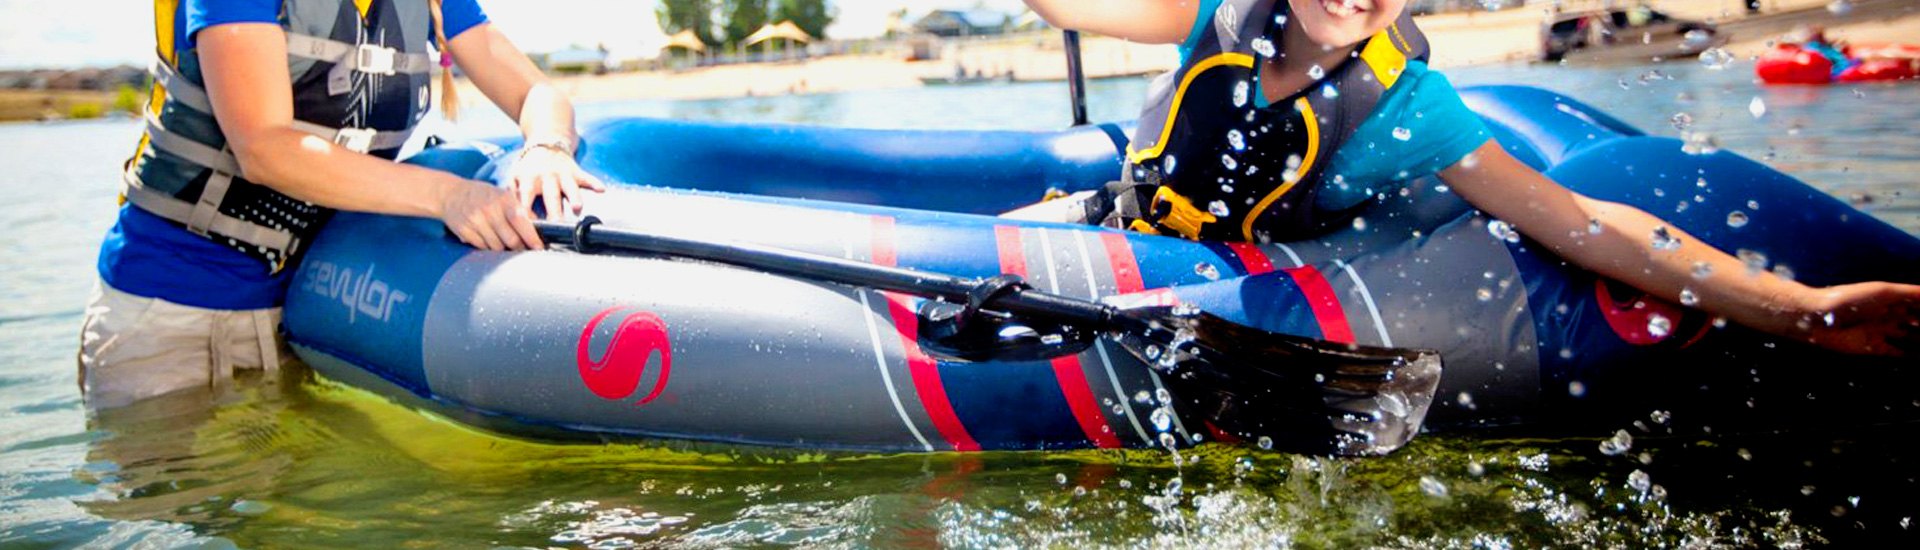 Inflatable Boats  Lightweight and Inexpensive Ways to Go Fishing